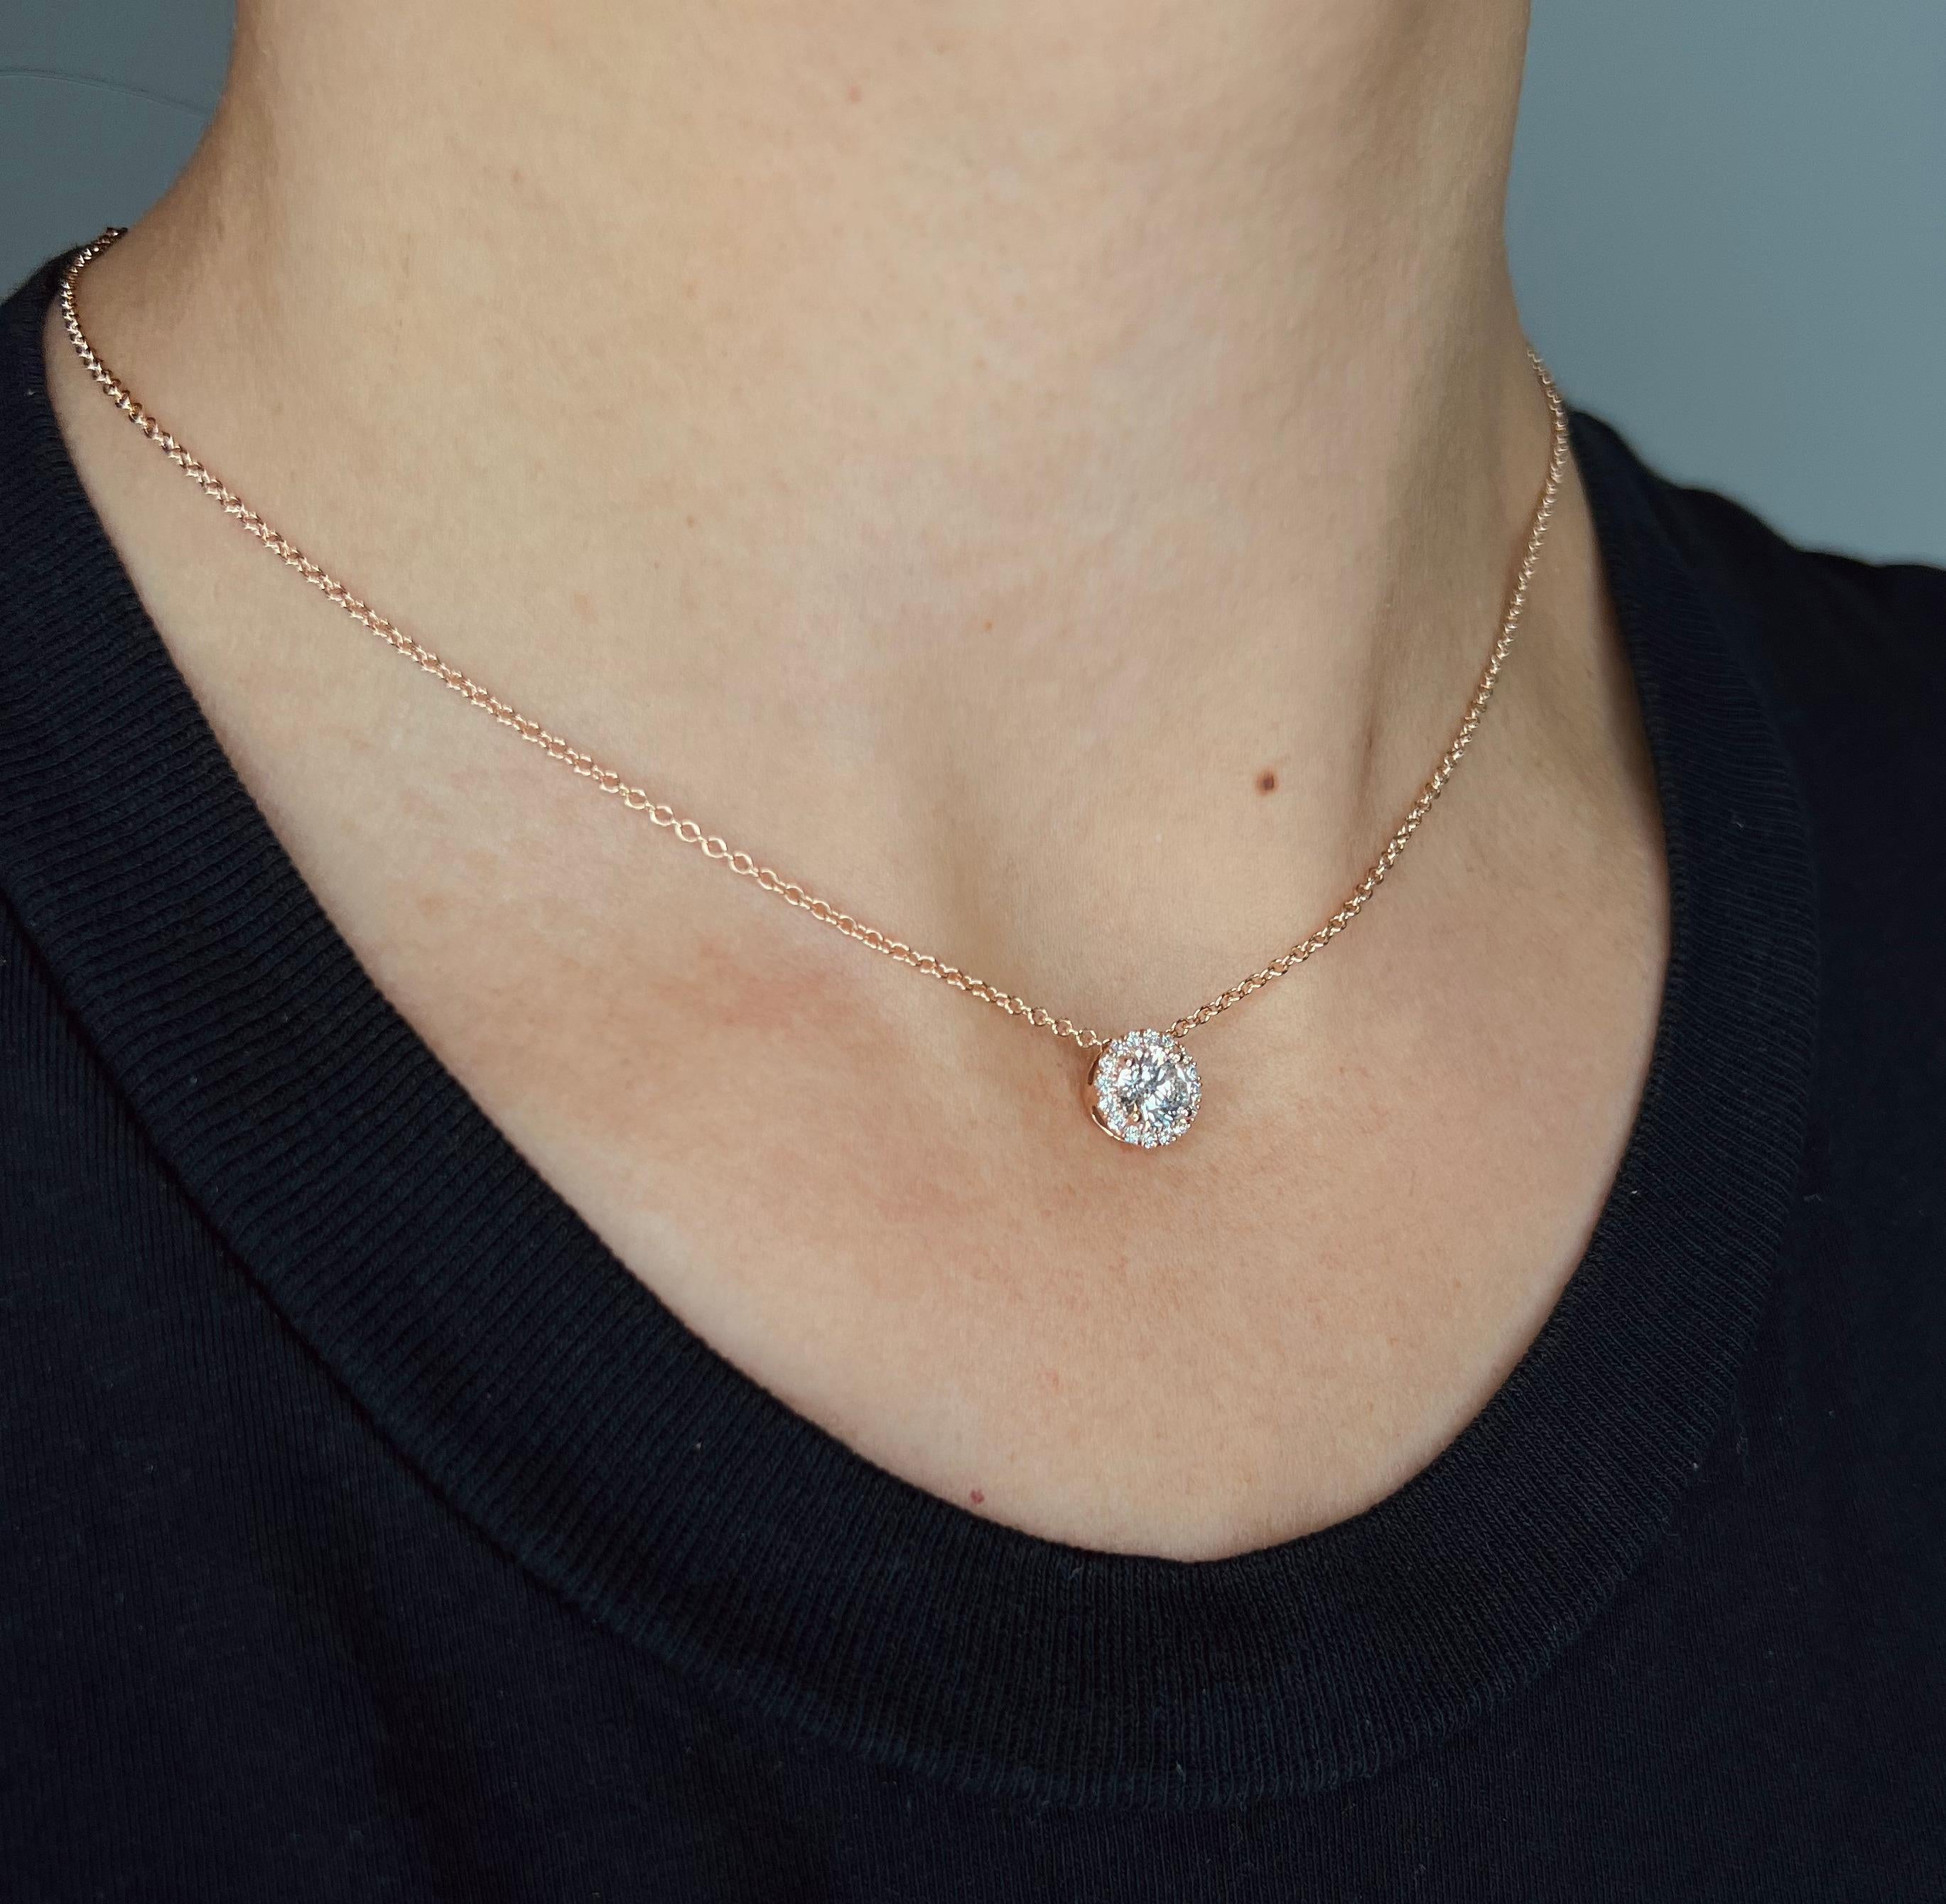 This diamond circle pendant provides a glowing chic look.
Metal: 14k Gold
Diamond Total Carats (Includes 0.15ct halo): 0.90 Total (0.75 Center) 
Diamond Cut: Round Natural Diamonds (Not Lab Grown)
Diamond Clarity: VS
Diamond Color: F
Color: Rose